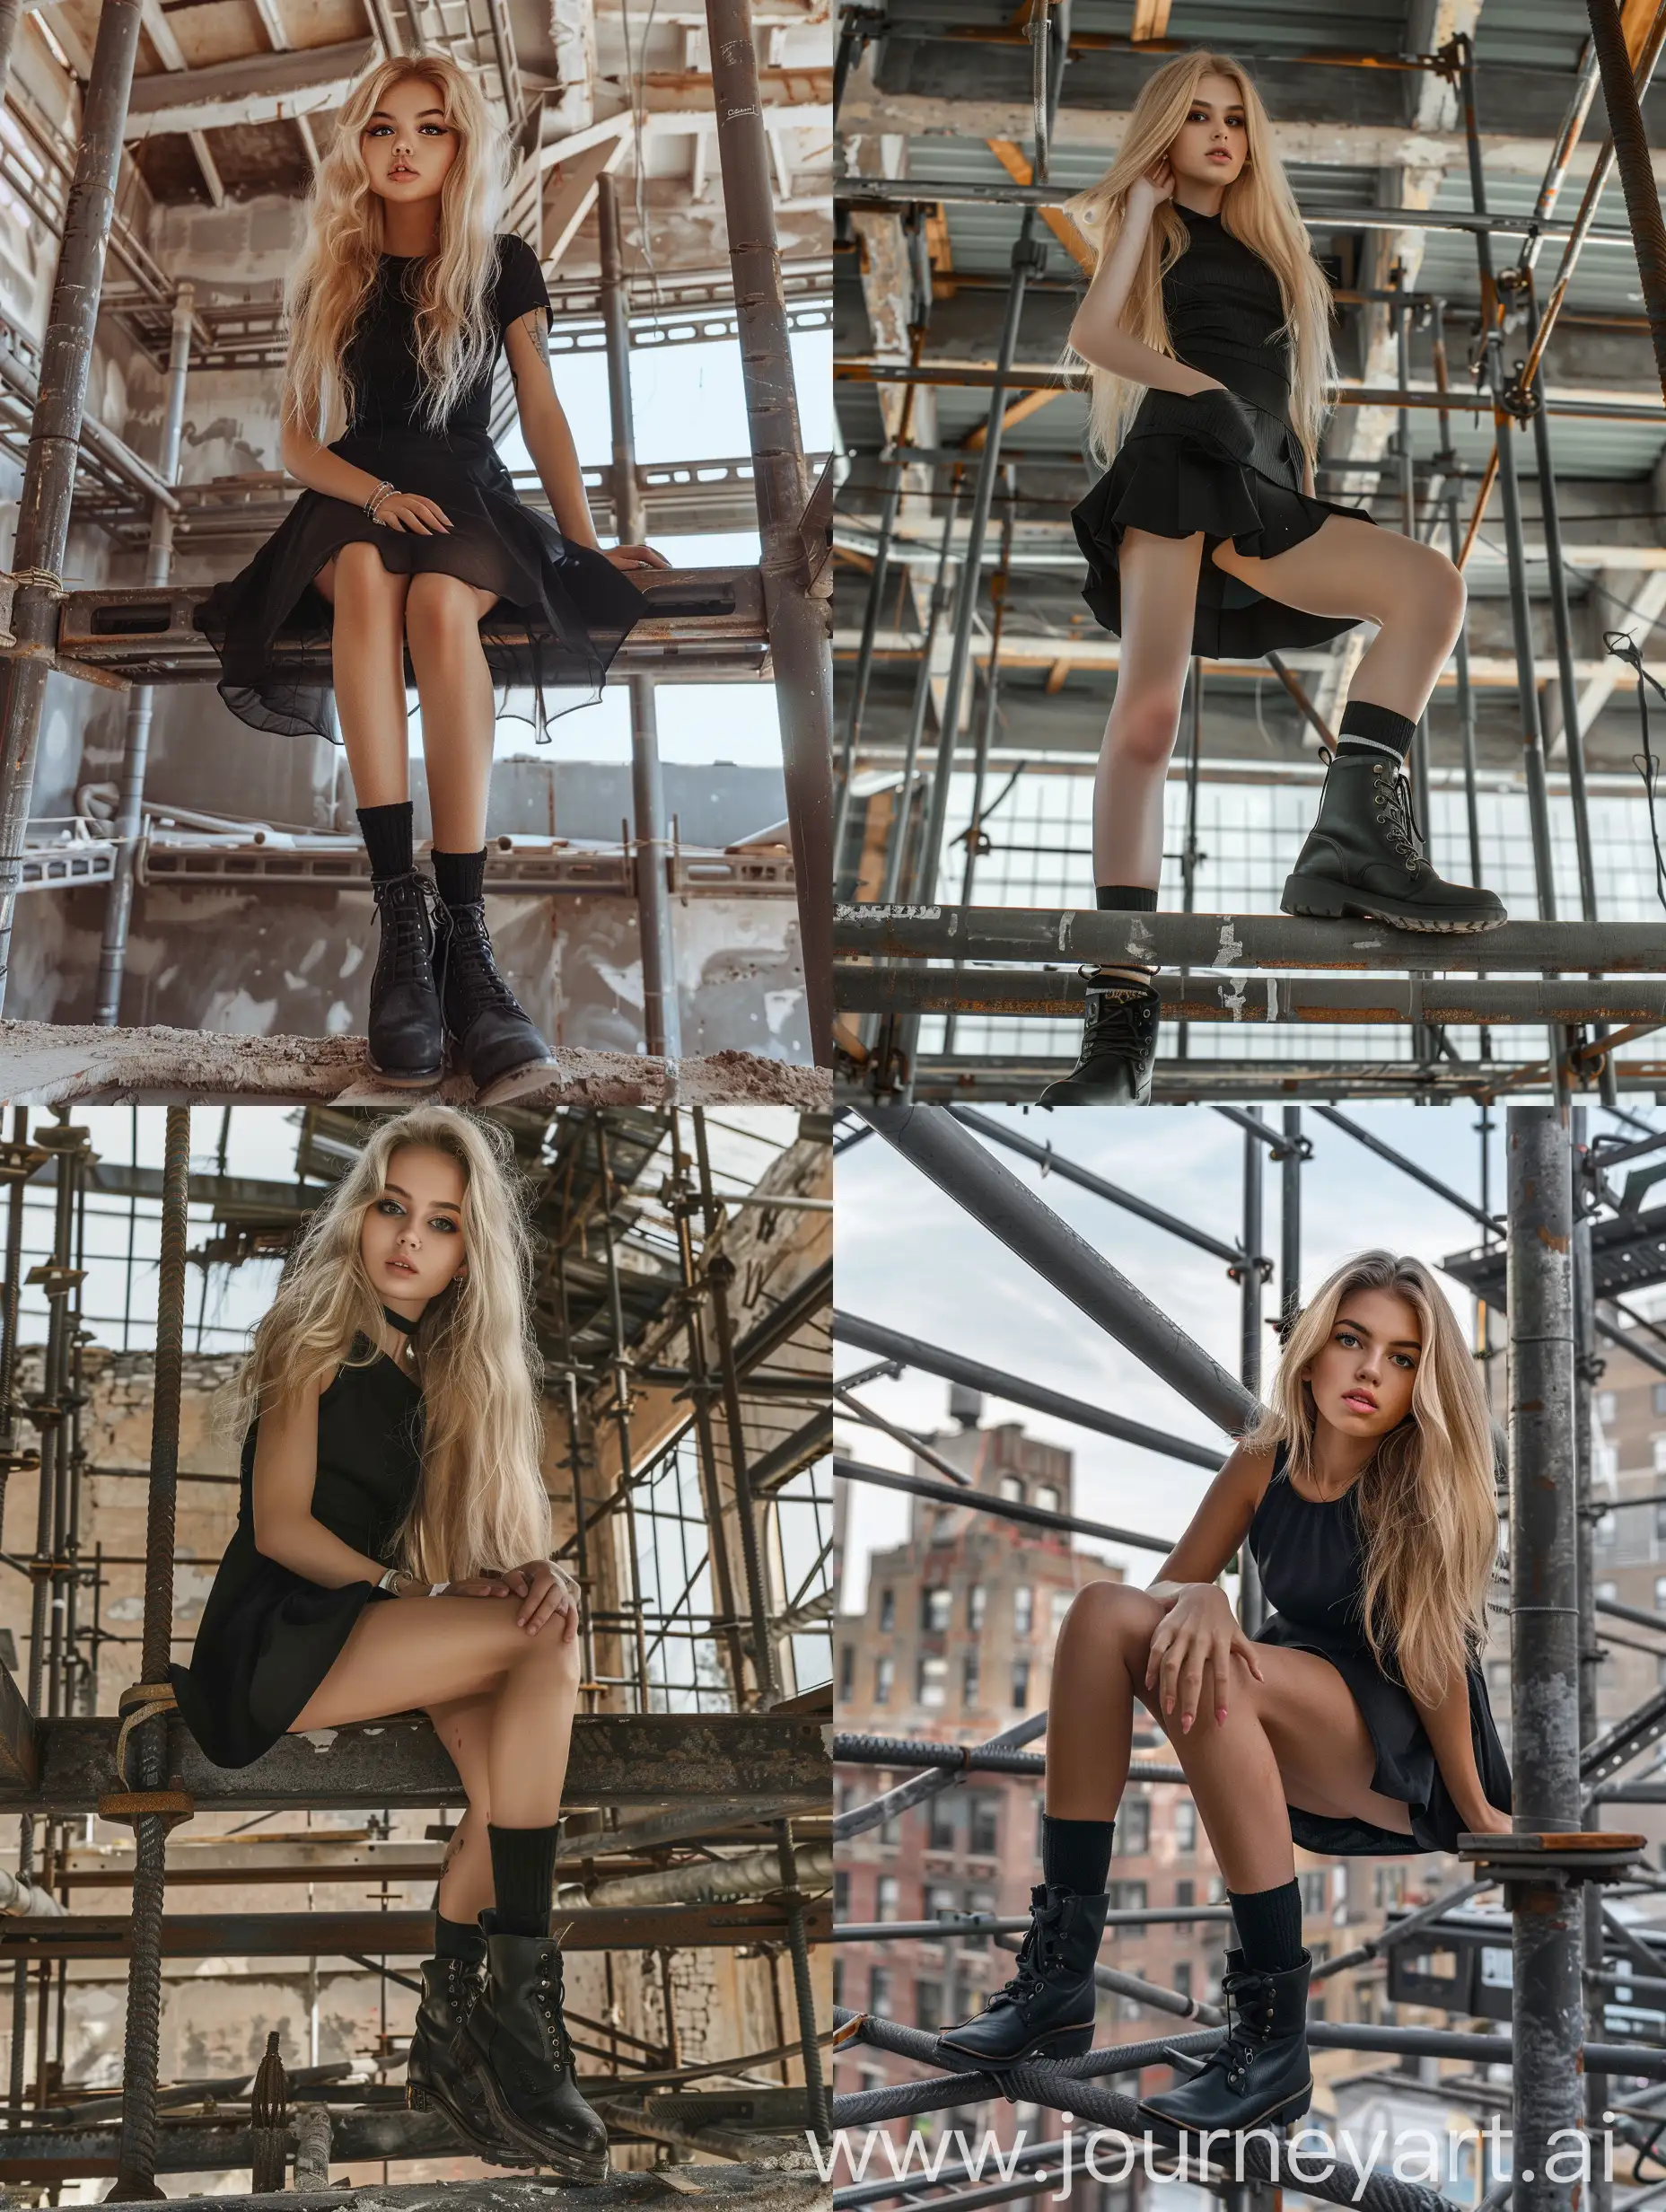 1 girl, long blond hair, 18 years old, influencer, beauty, black dress, makeup,, , little fat, black boots, , socks and boots, 4k, , is working on a steel scaffold under construction